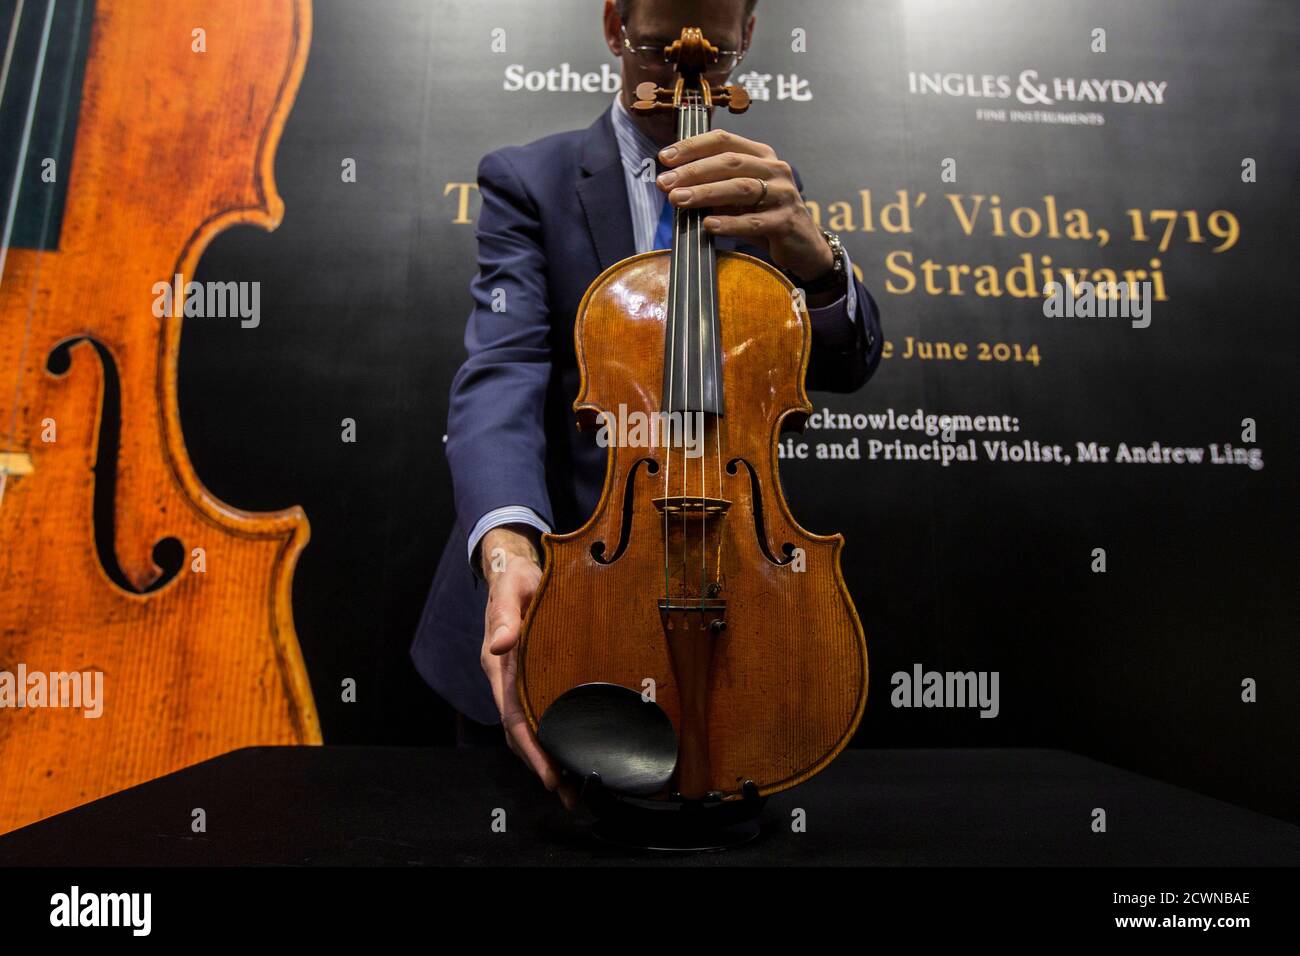 A staff member holds the 'Macdonald' viola made by Italian artisan Antonio  Stradivari in 1719 during a preview before Sotheby's Spring Sales at  Sotheby's gallery in Hong Kong April 4, 2014. The